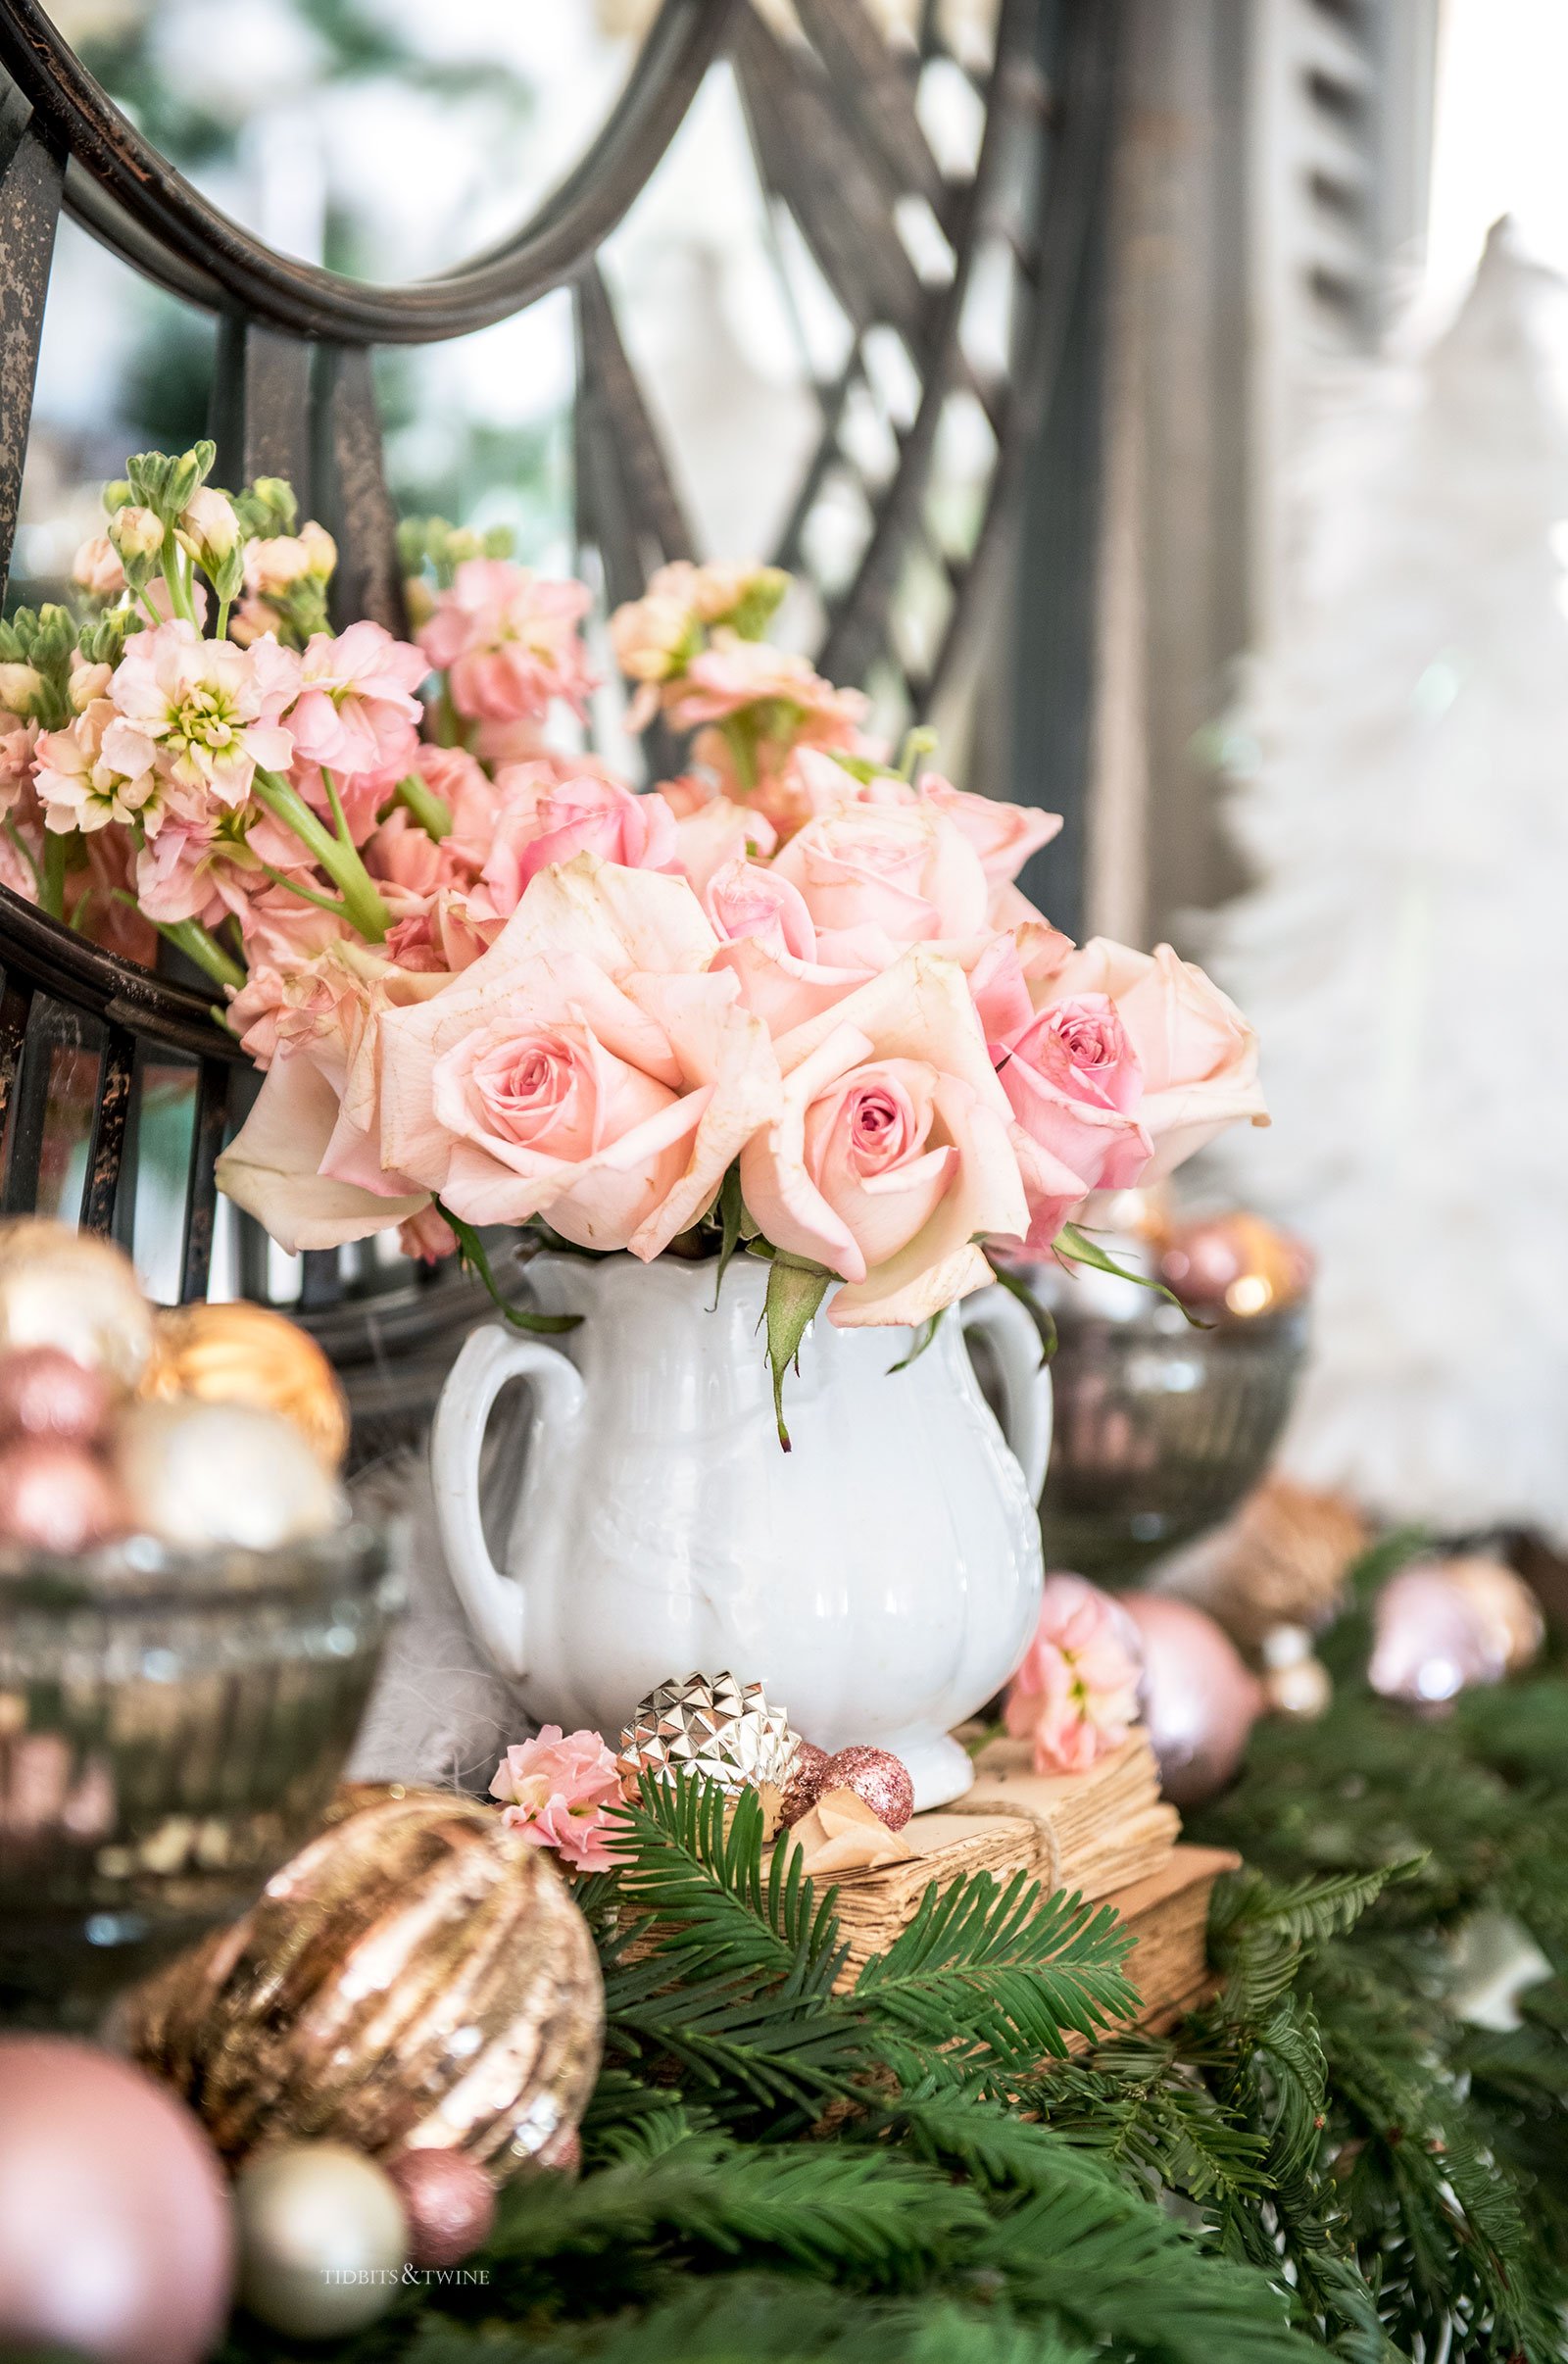 Decorating with Flowers: 20 Ideas to Try Right Now